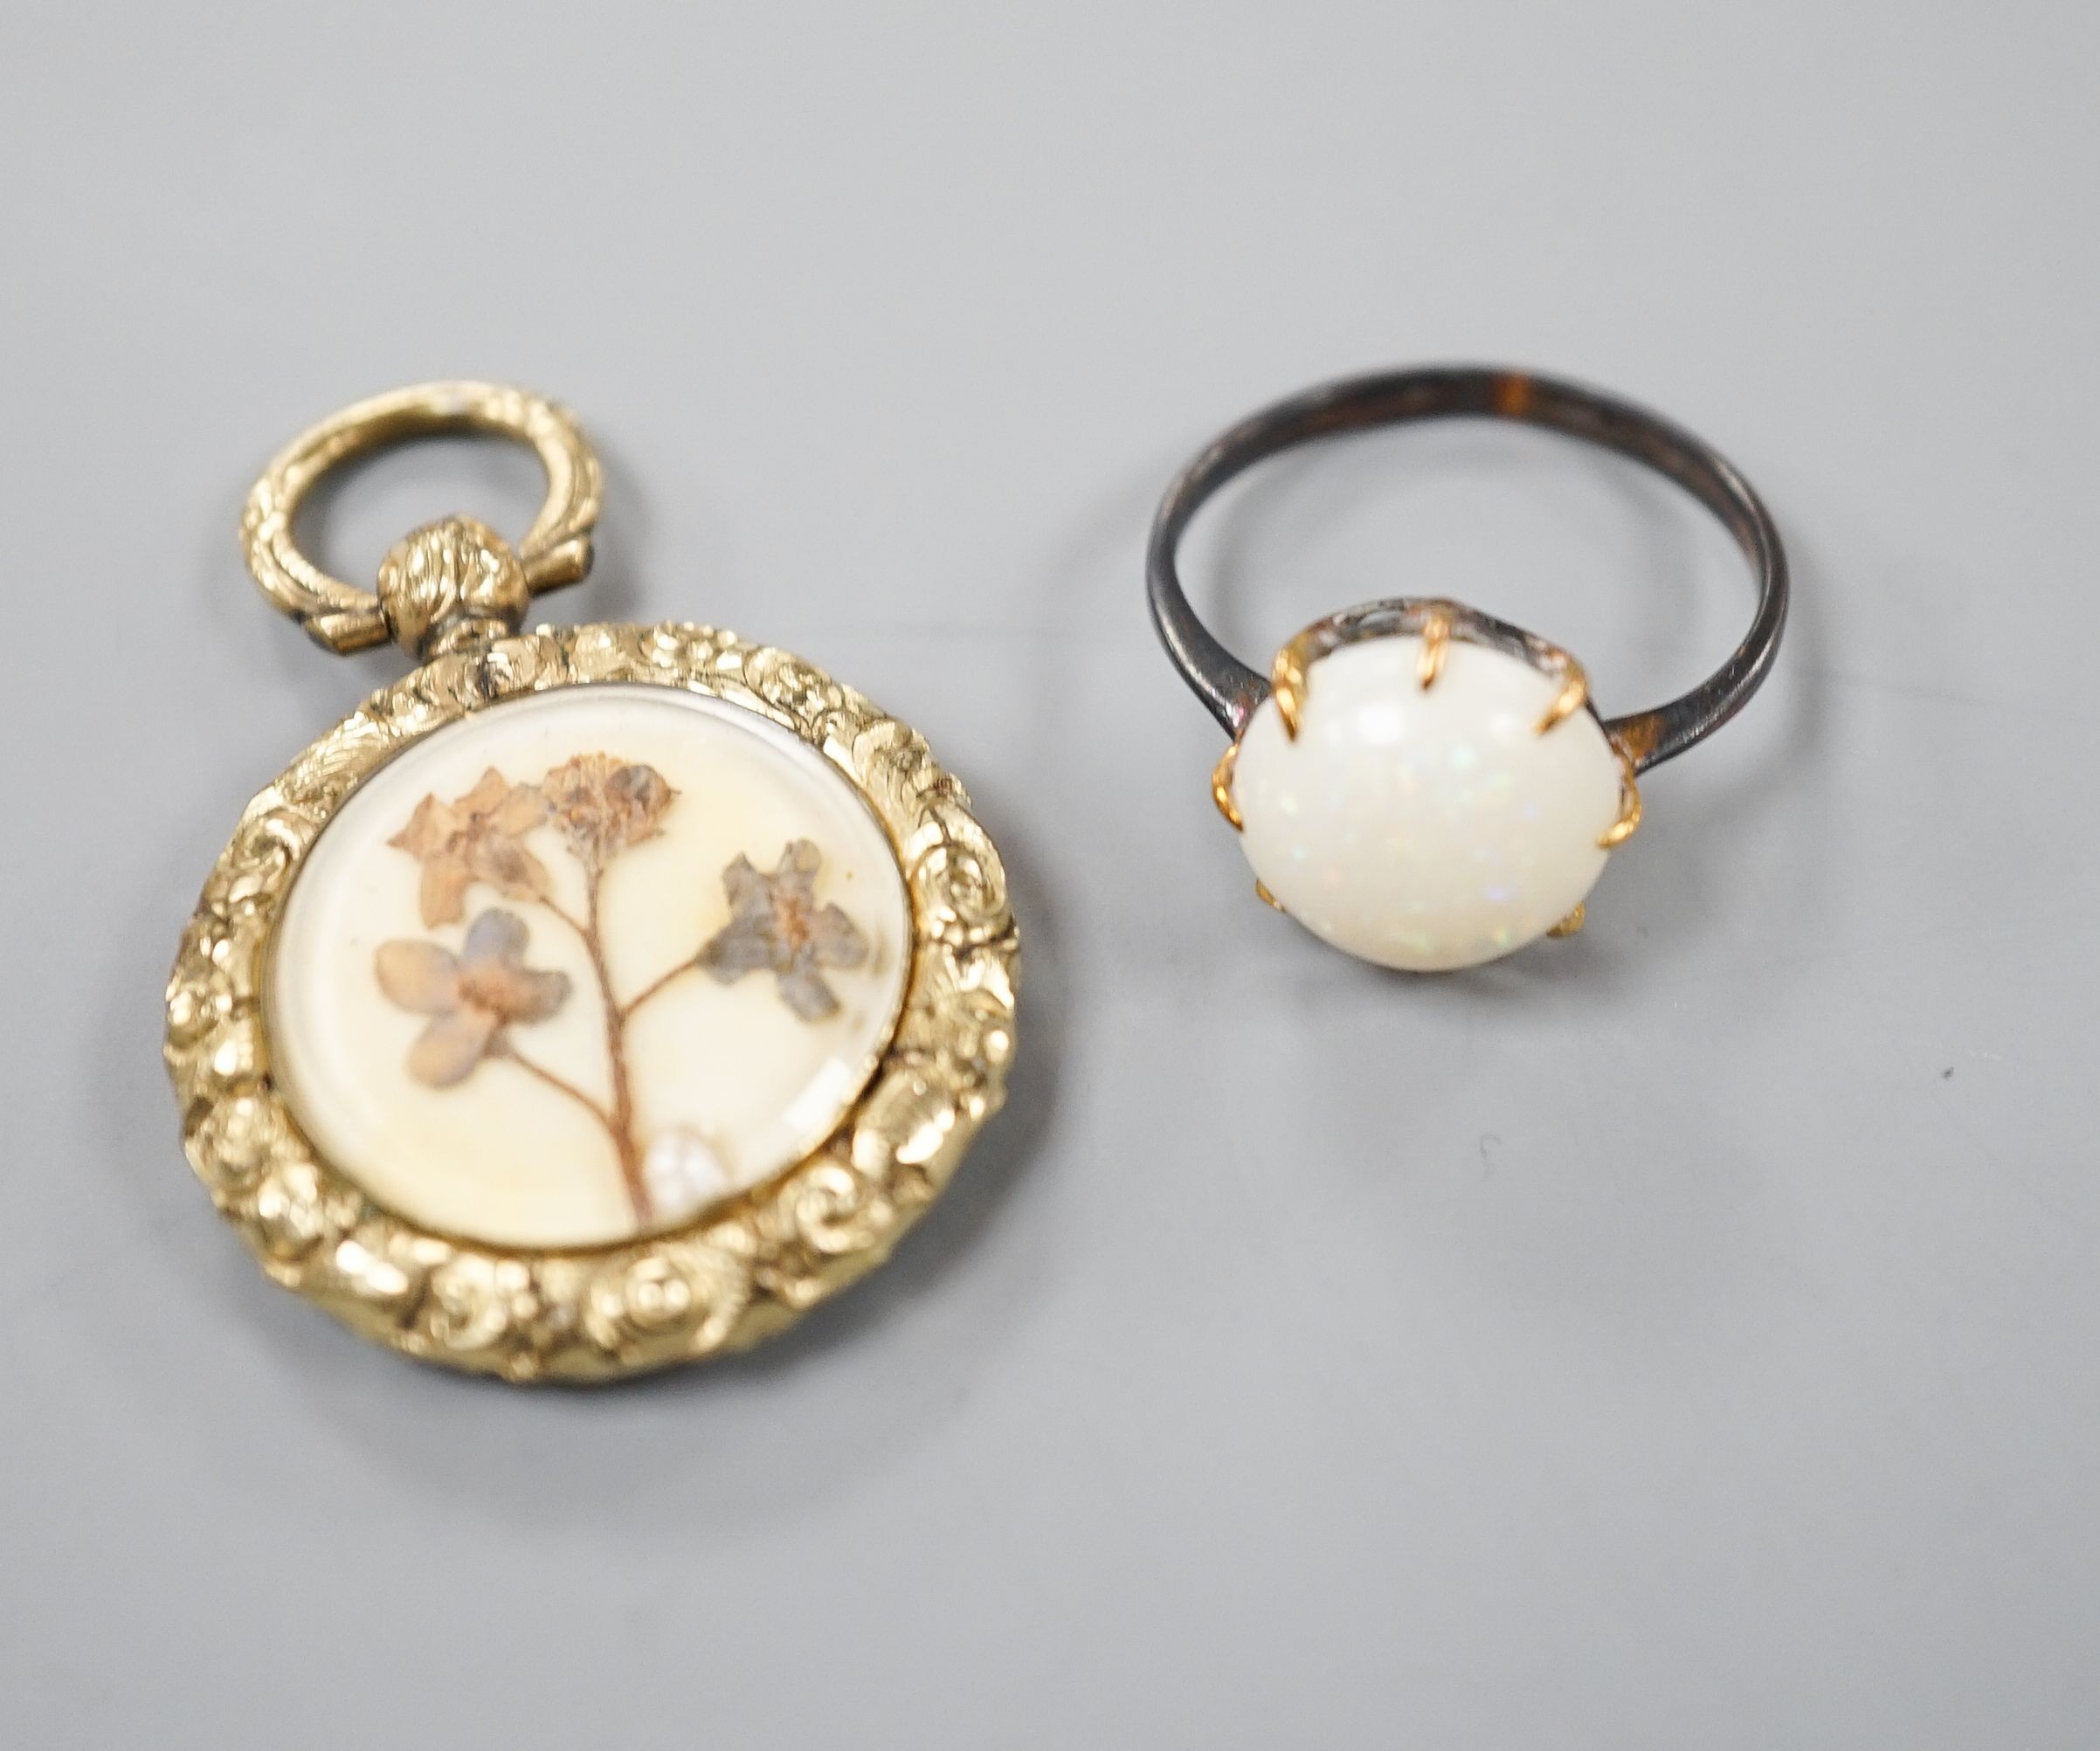 A yellow metal and white opal ring, size K/L and a late Victorian engraved yellow metal pendant, 25mm.